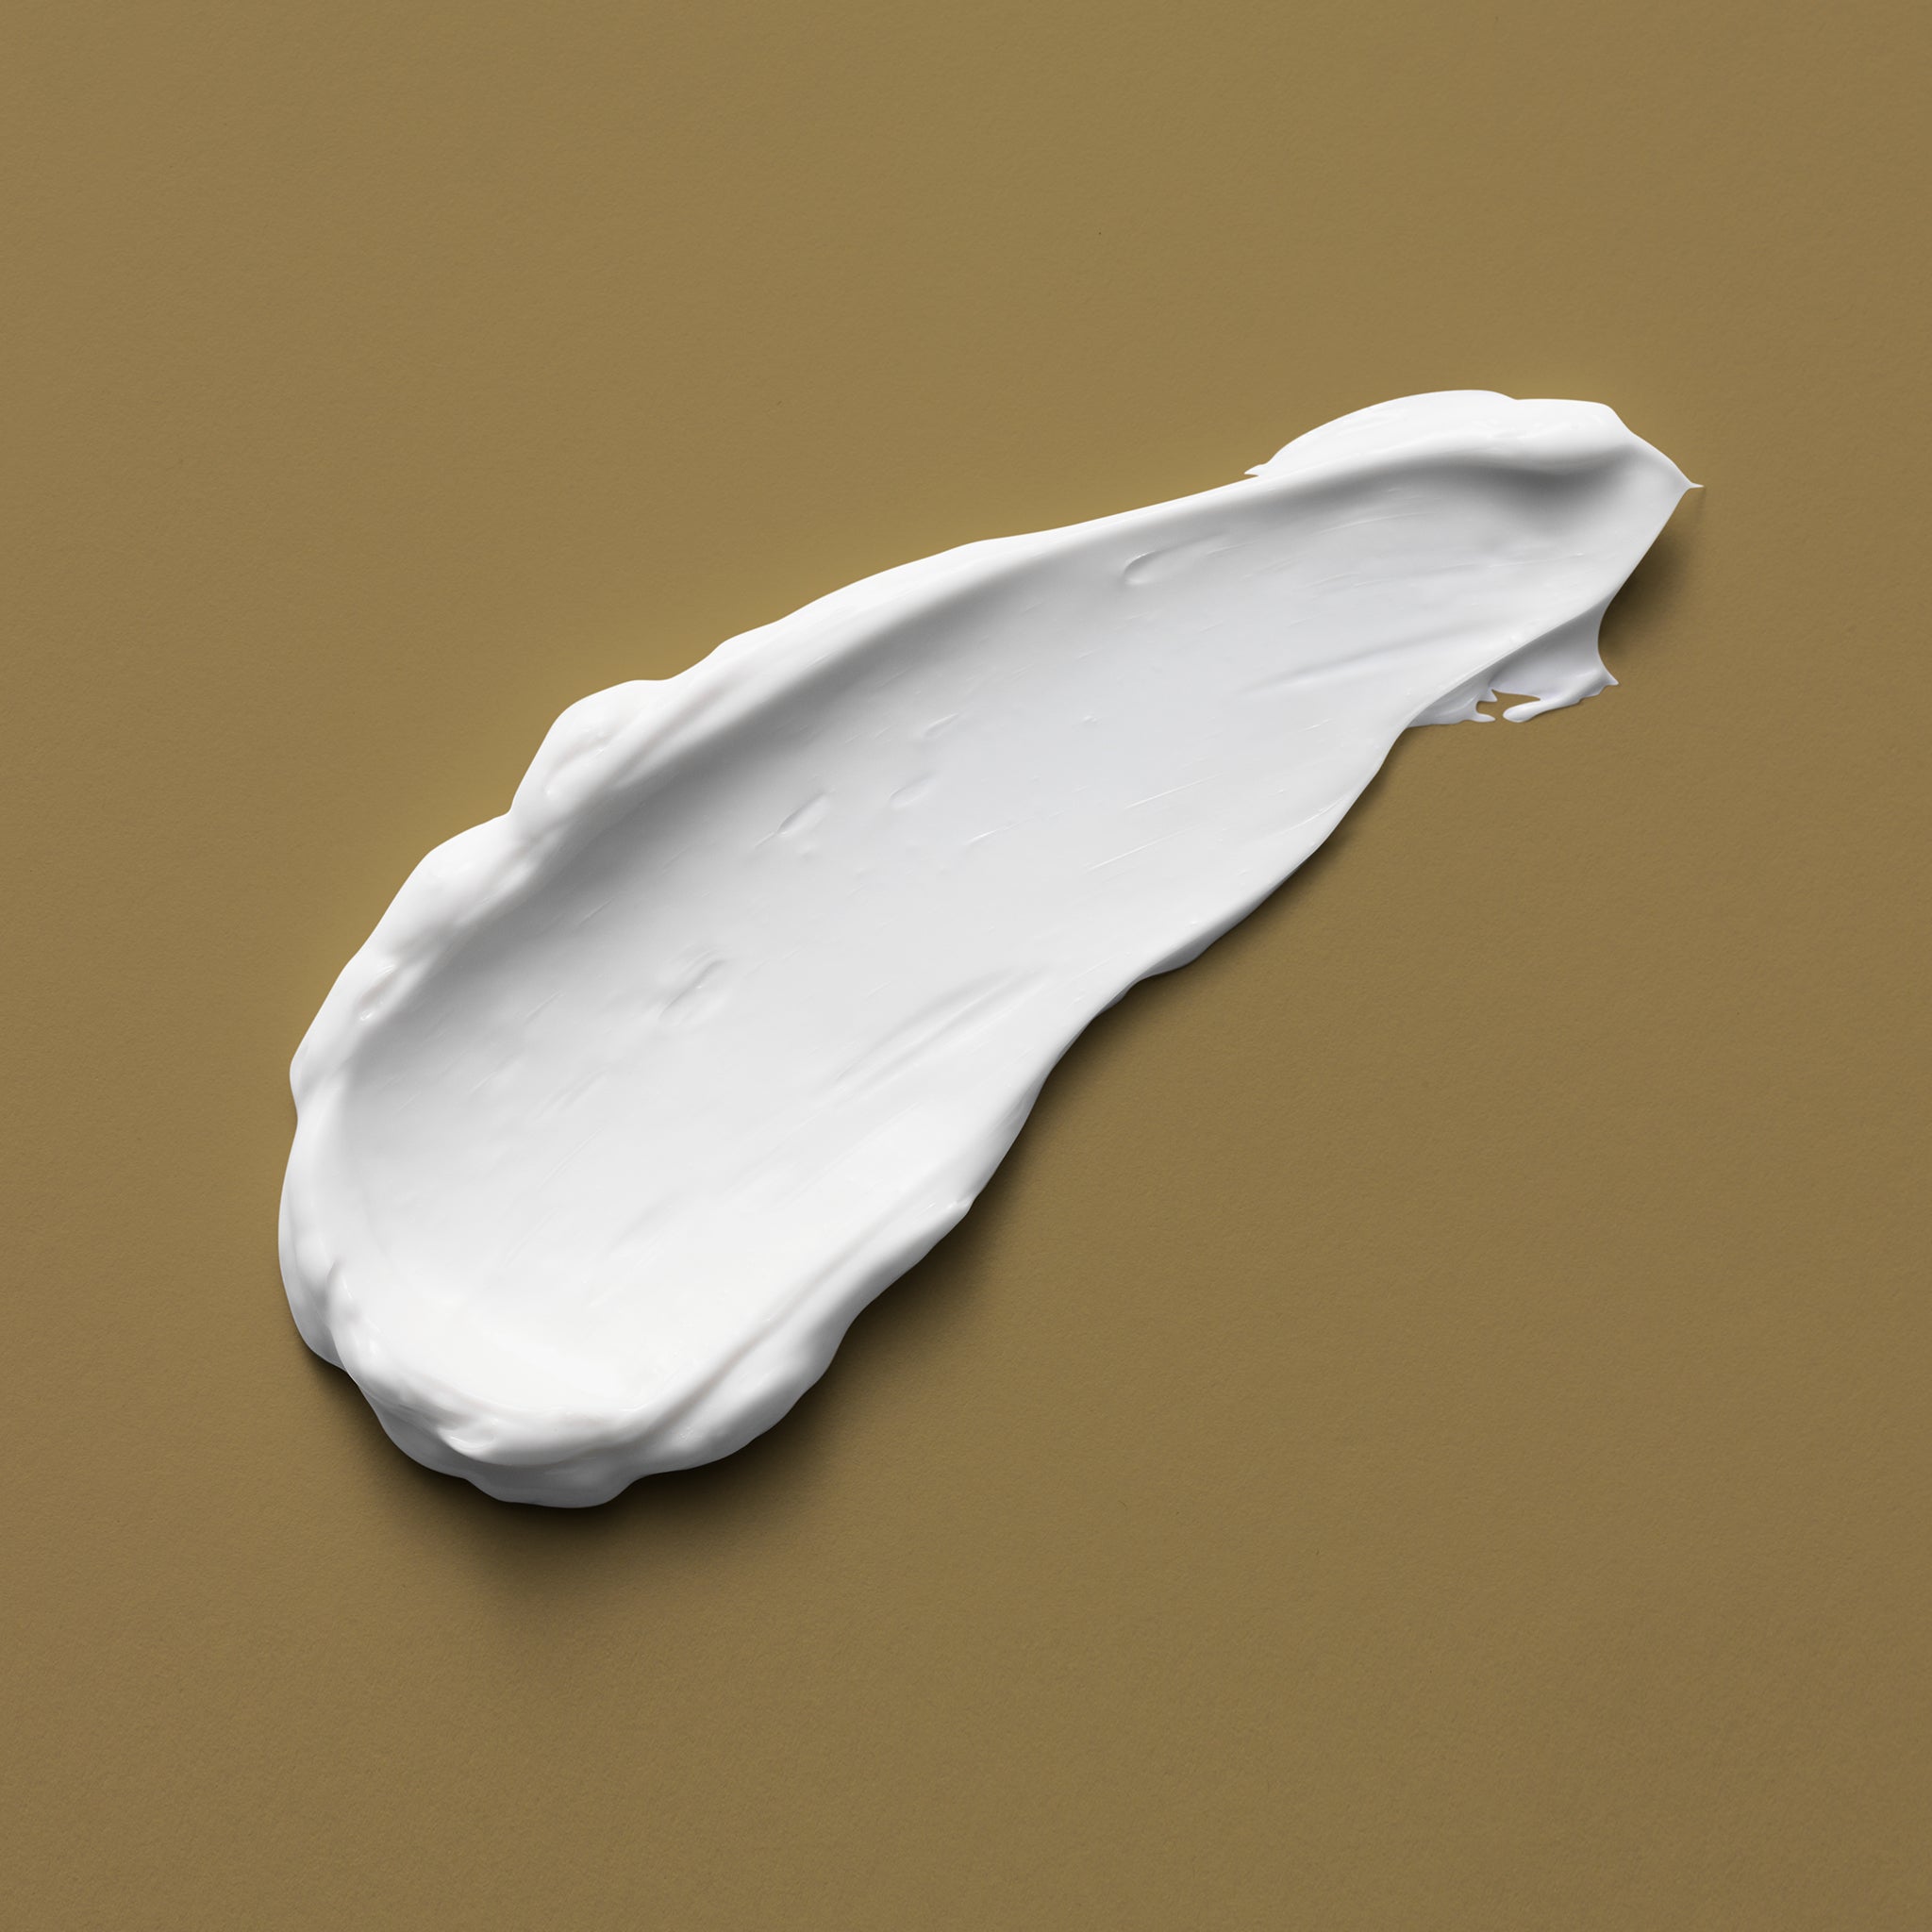 A smear of bright white cream on a light brown background